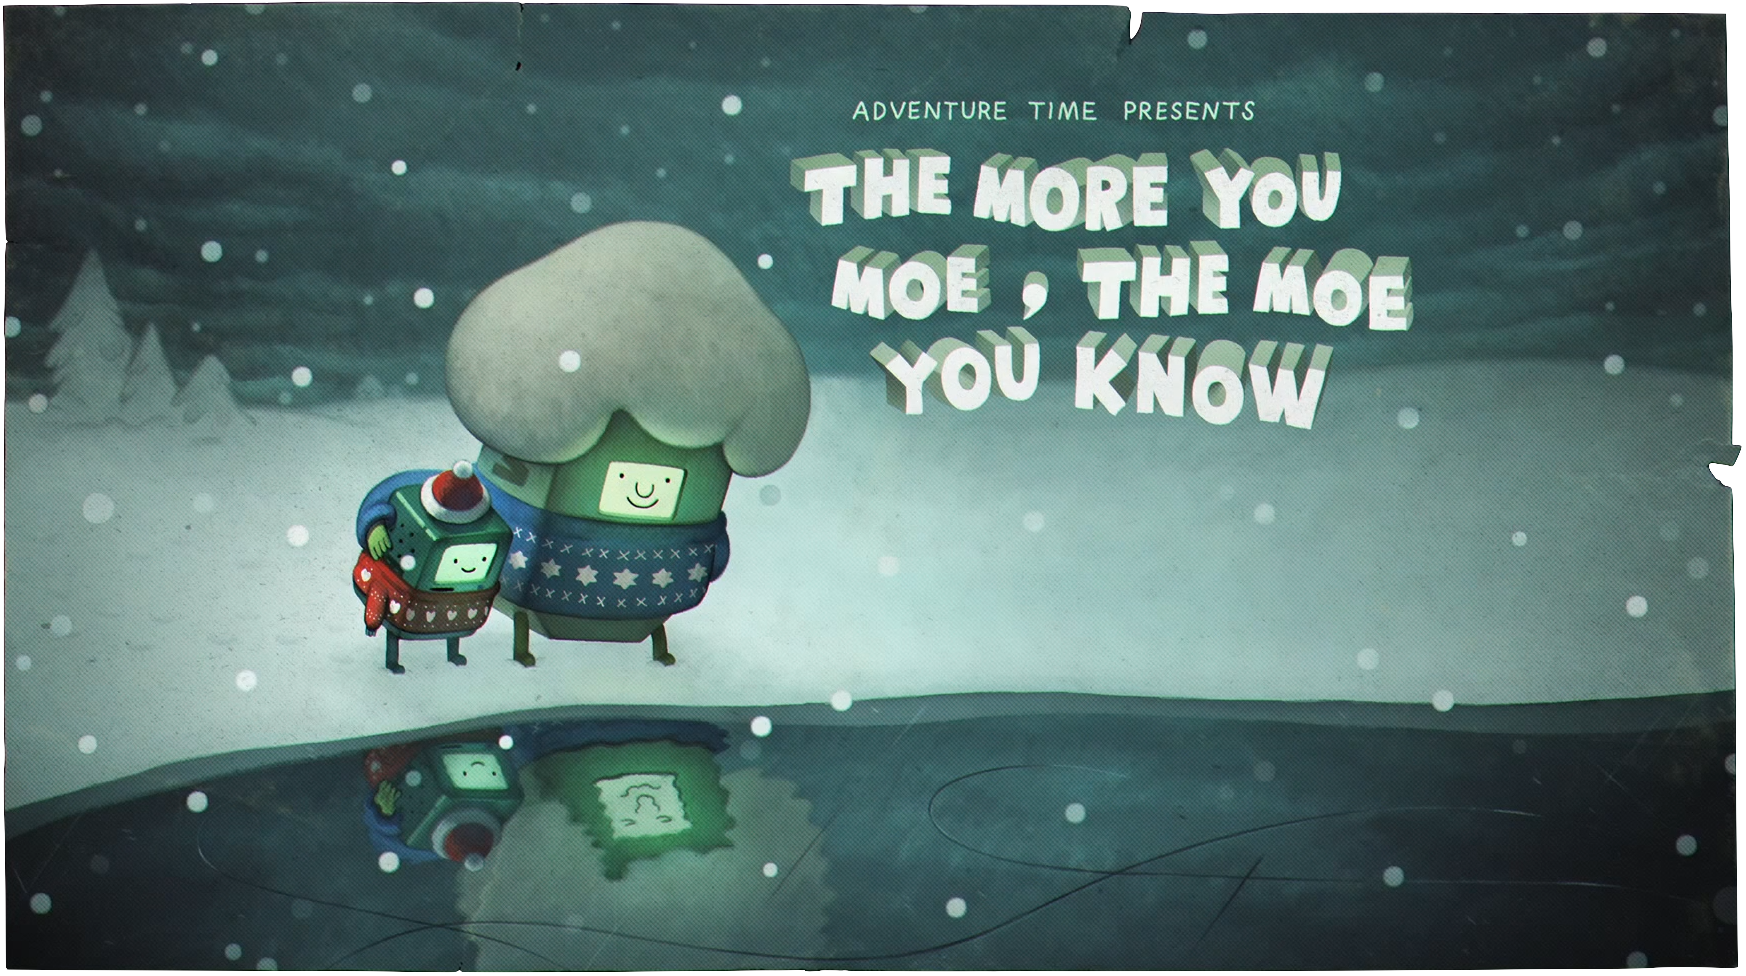 The More You Moe, The Moe You Know (Part I) | Adventure Time Wiki | FANDOM powered by ...